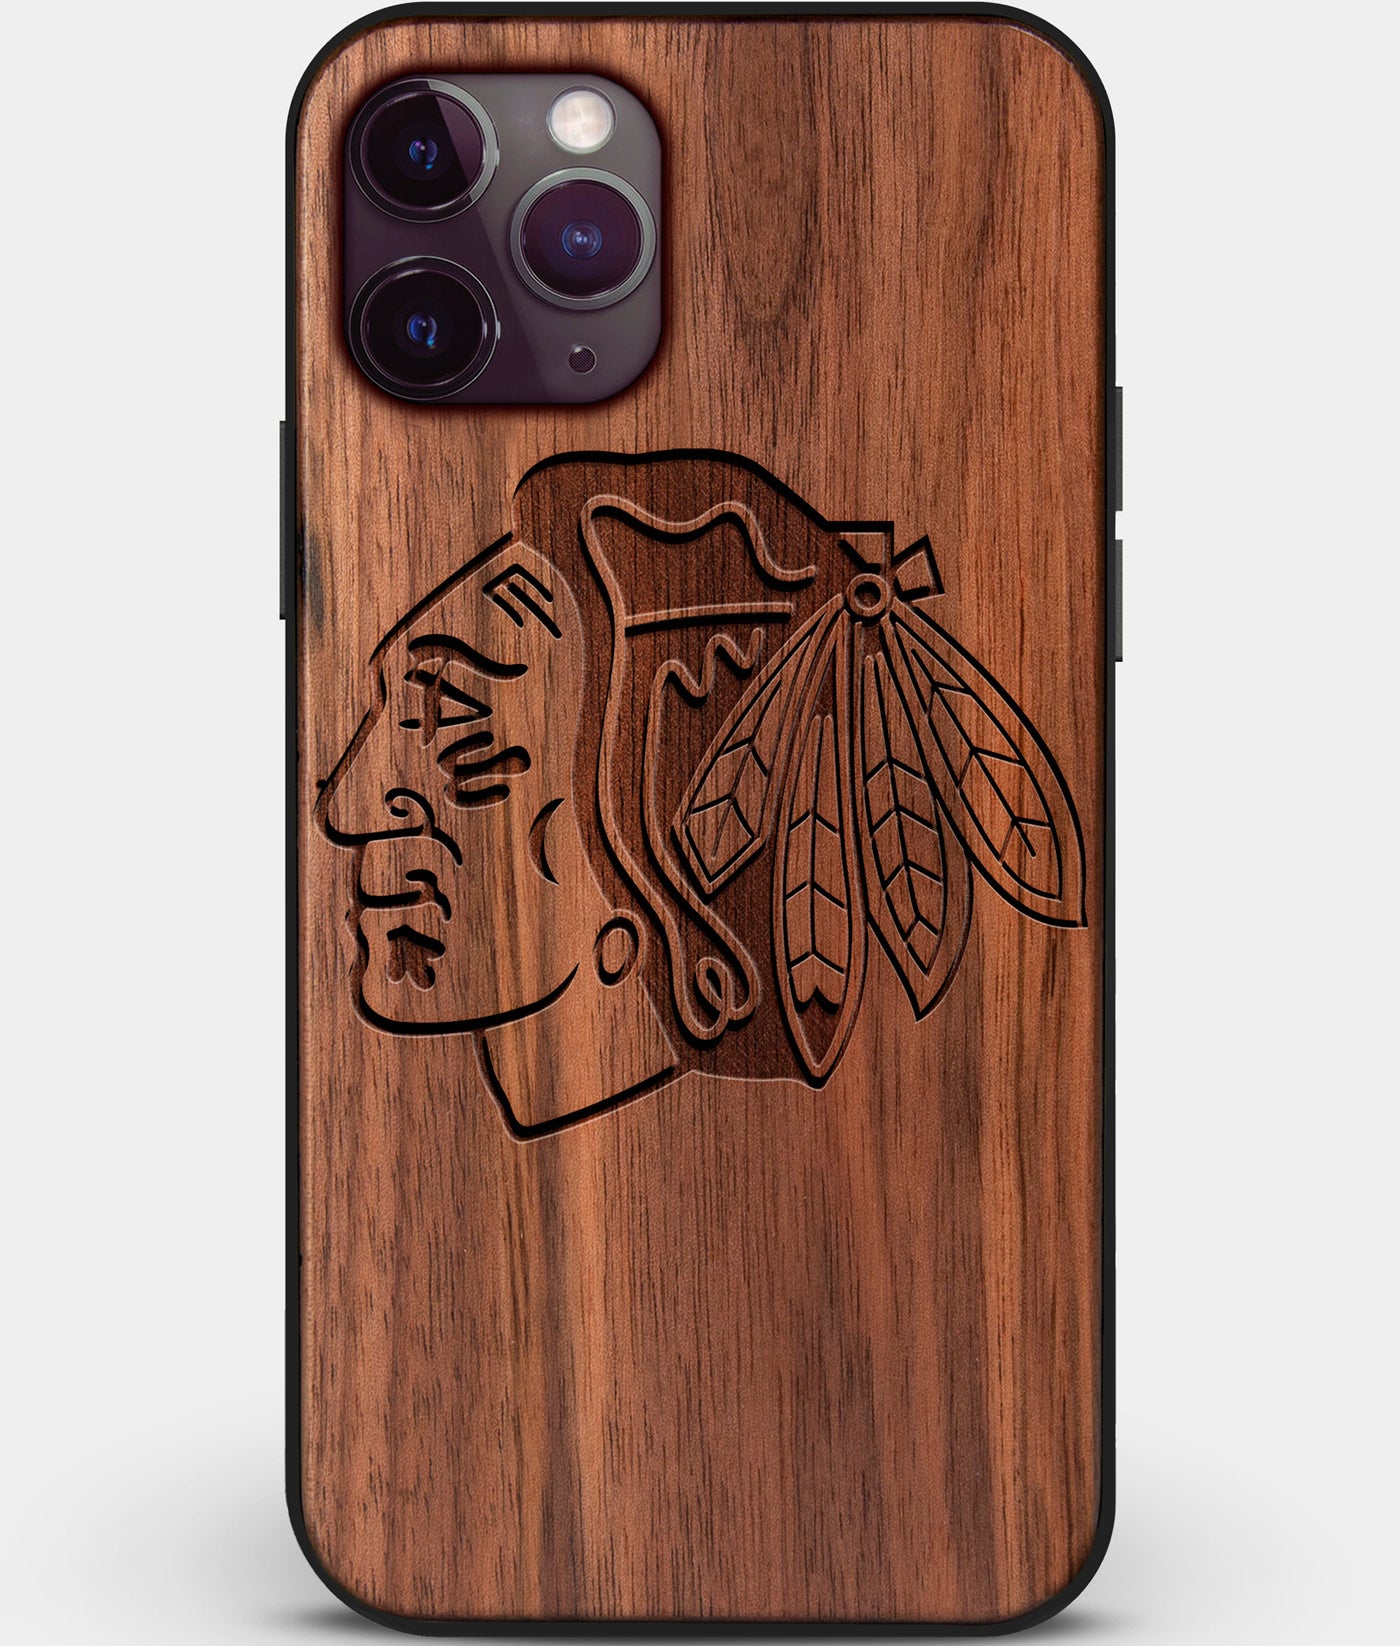 Custom Carved Wood Chicago Blackhawks iPhone 11 Pro Max Case | Personalized Walnut Wood Chicago Blackhawks Cover, Birthday Gift, Gifts For Him, Monogrammed Gift For Fan | by Engraved In Nature